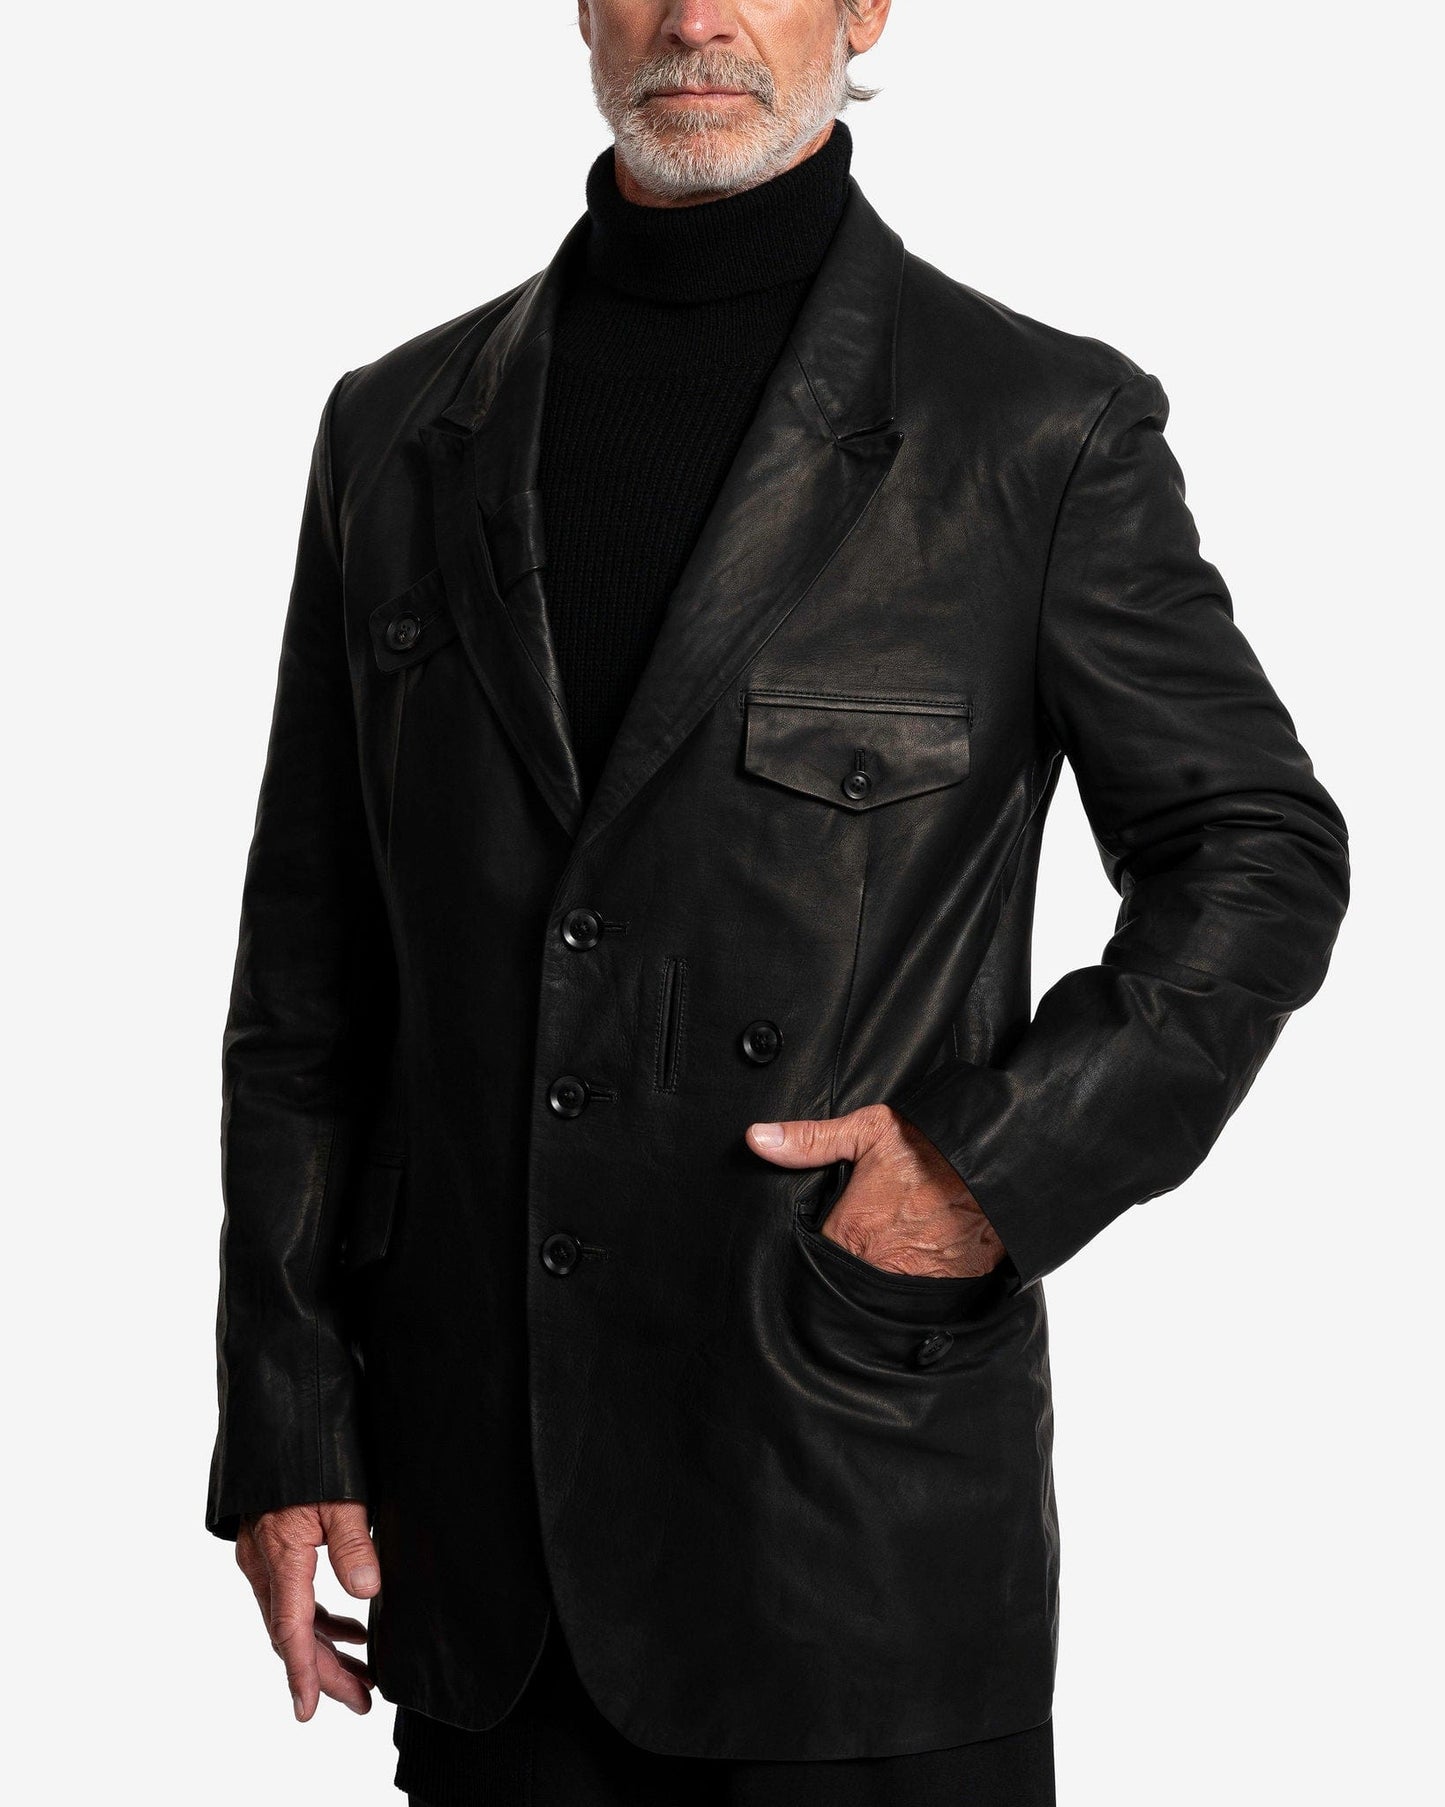 Yohji Yamamoto Pour Homme Men's Jackets Leather Suit Jacket with Tab Details